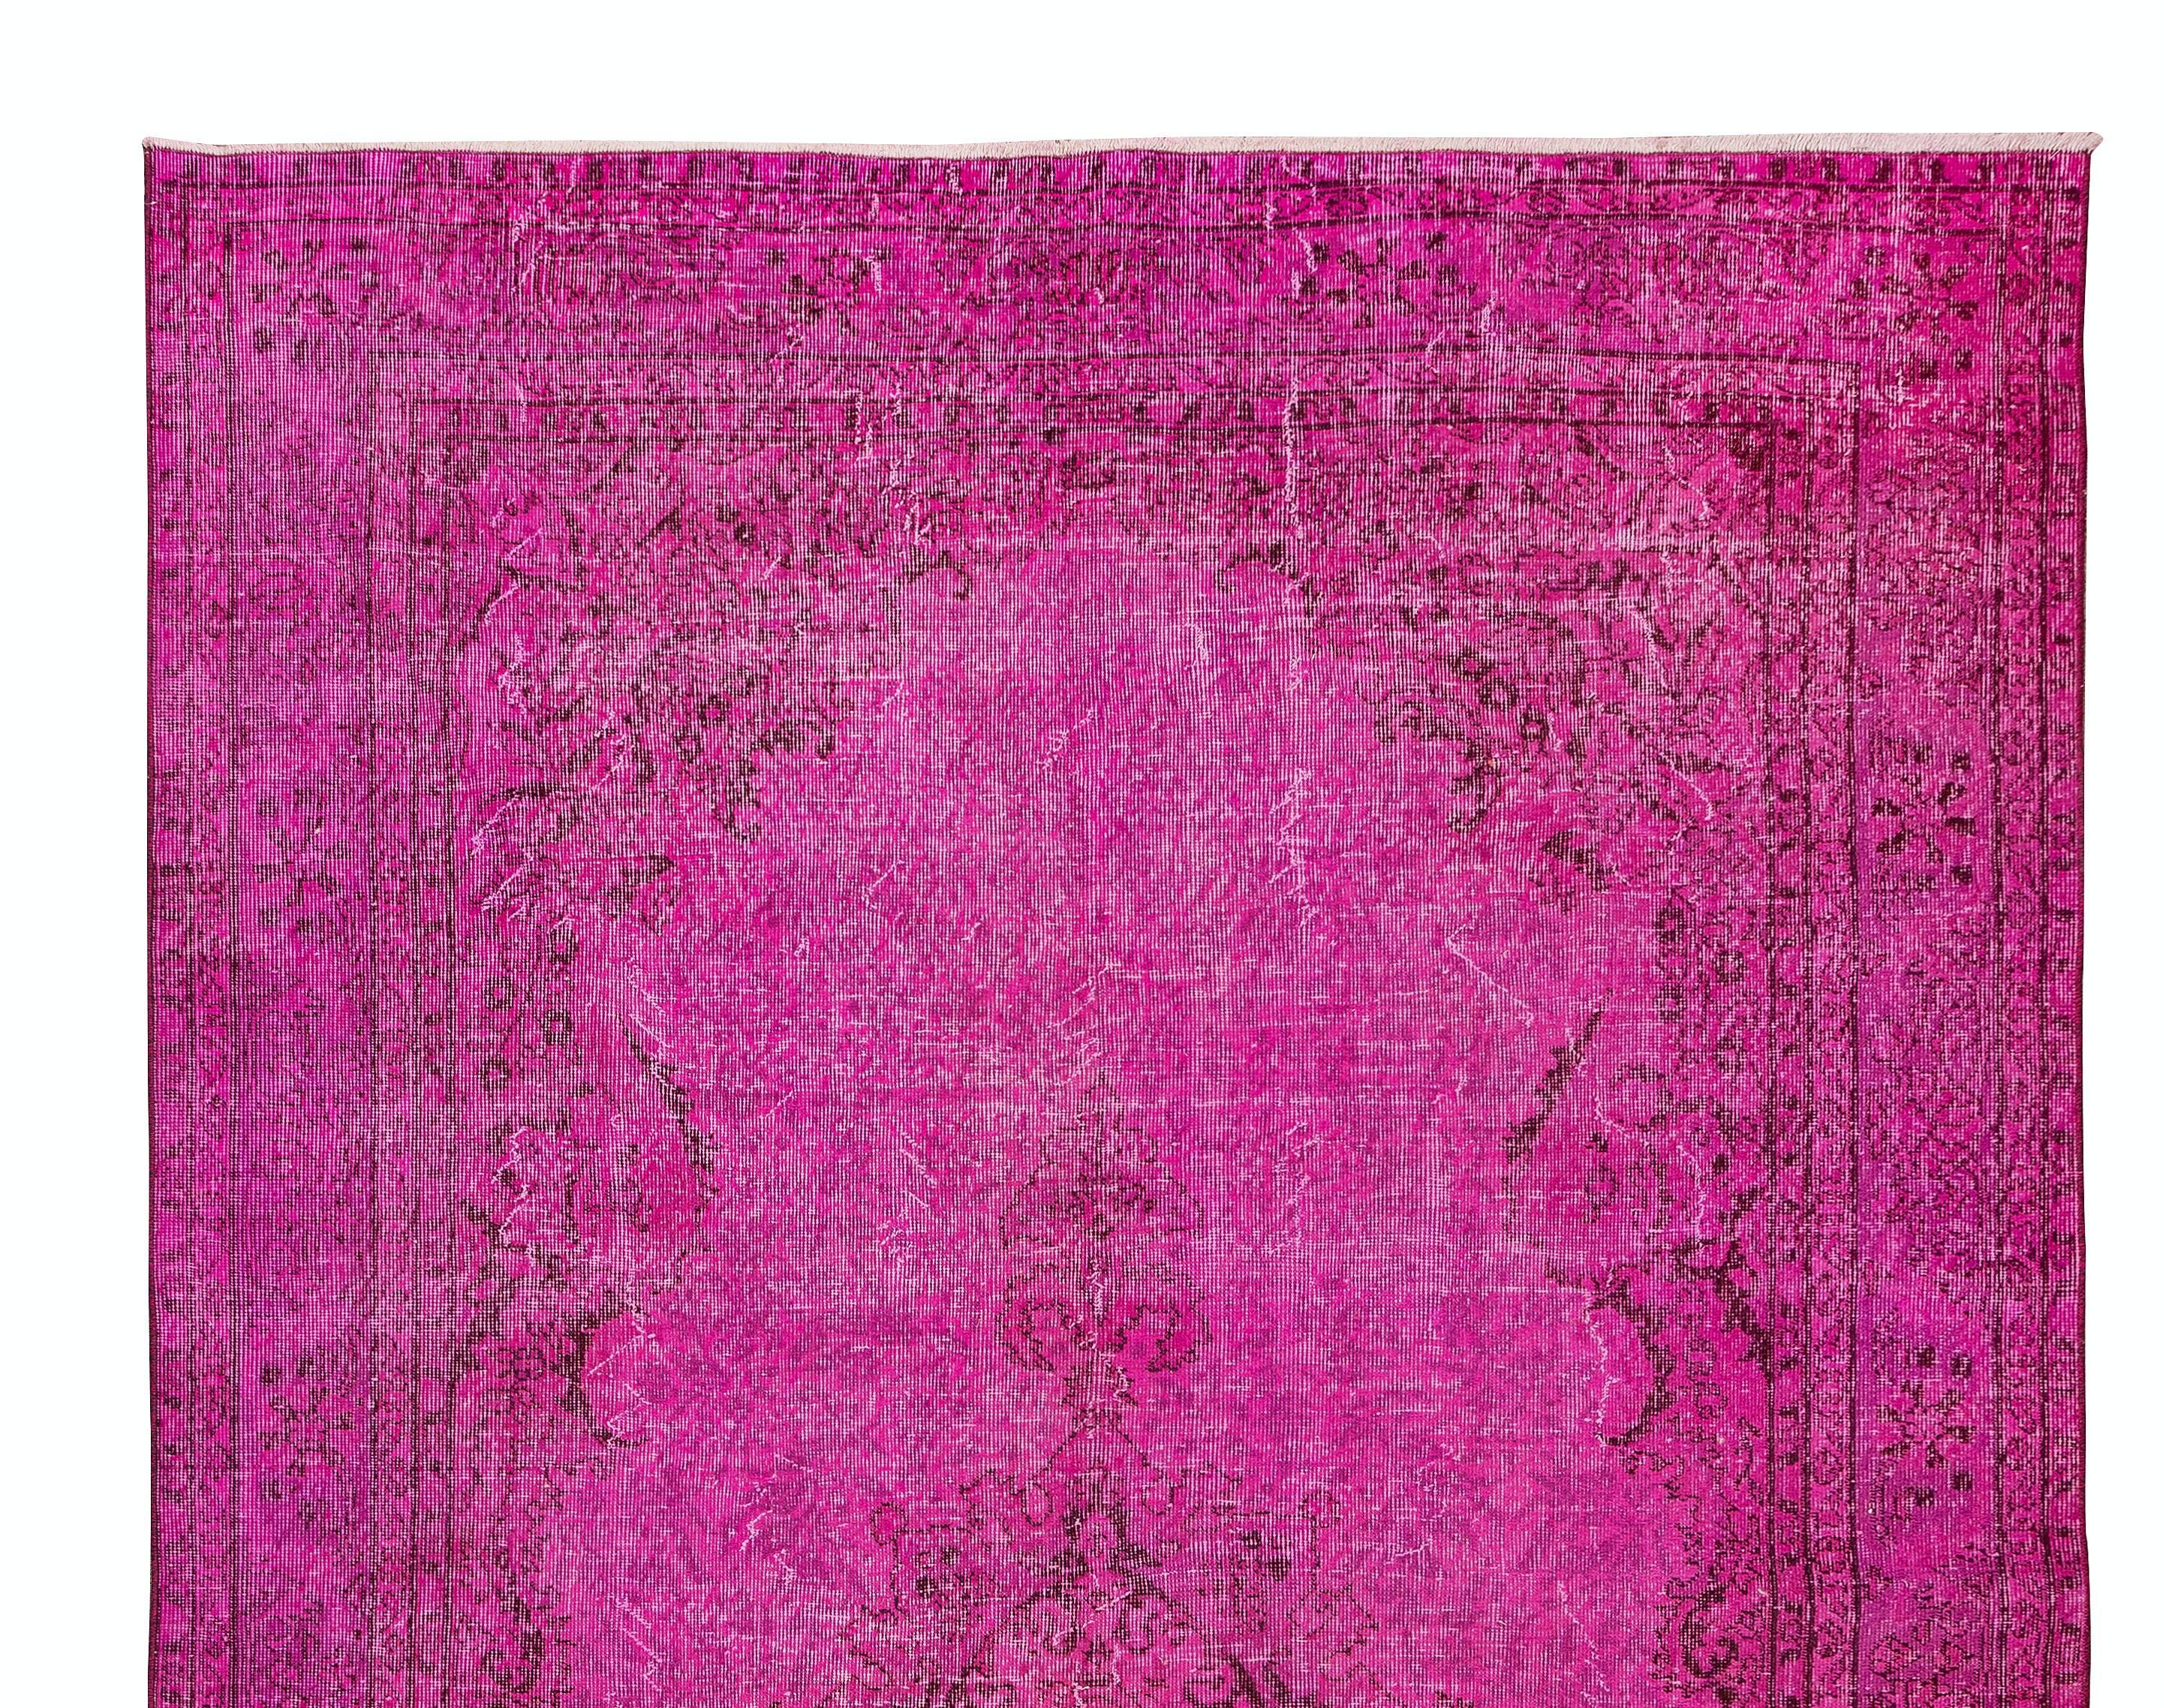 Hand-Woven 6.8x10.5 Ft Hand Knotted Vintage Turkish Rug in Pink, Modern Decorative Carpet